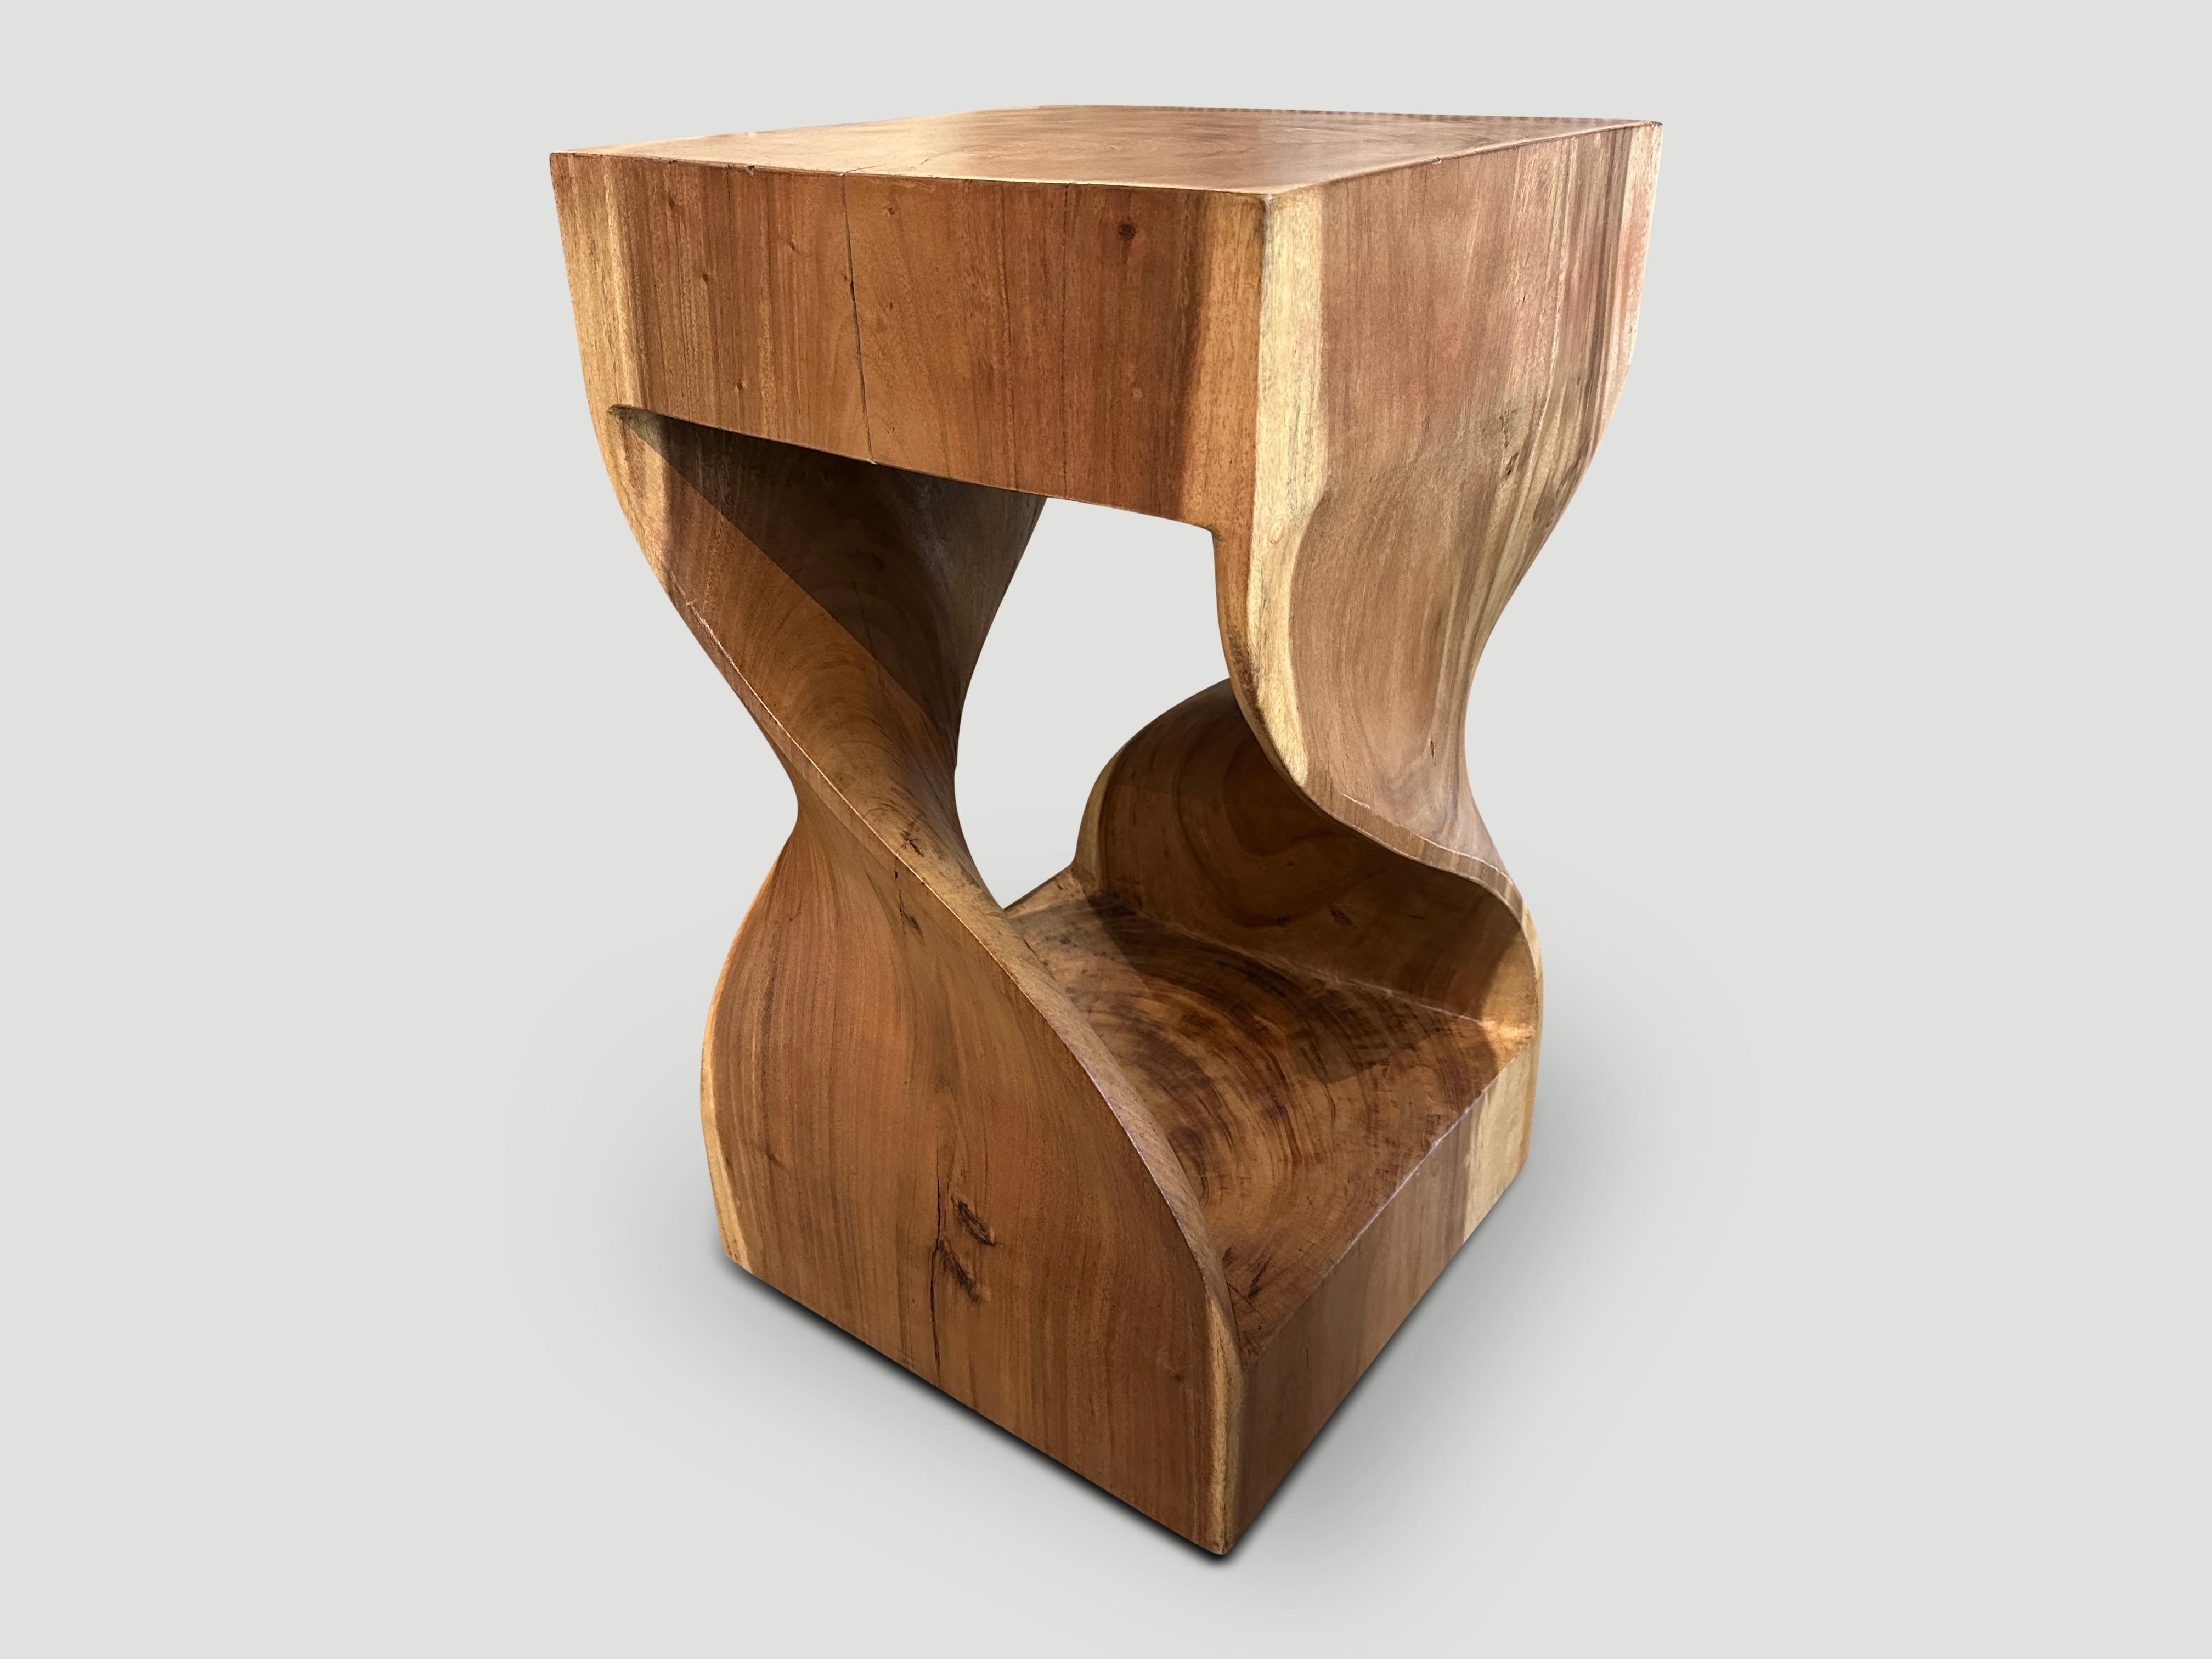 Impressive reclaimed suar wood pedestal. Hand carved into this stunning shape from a single block of wood. Finished with a natural oil revealing the beautiful contrasting wood grain. Both usable and sculptural. Pair available. The price reflects